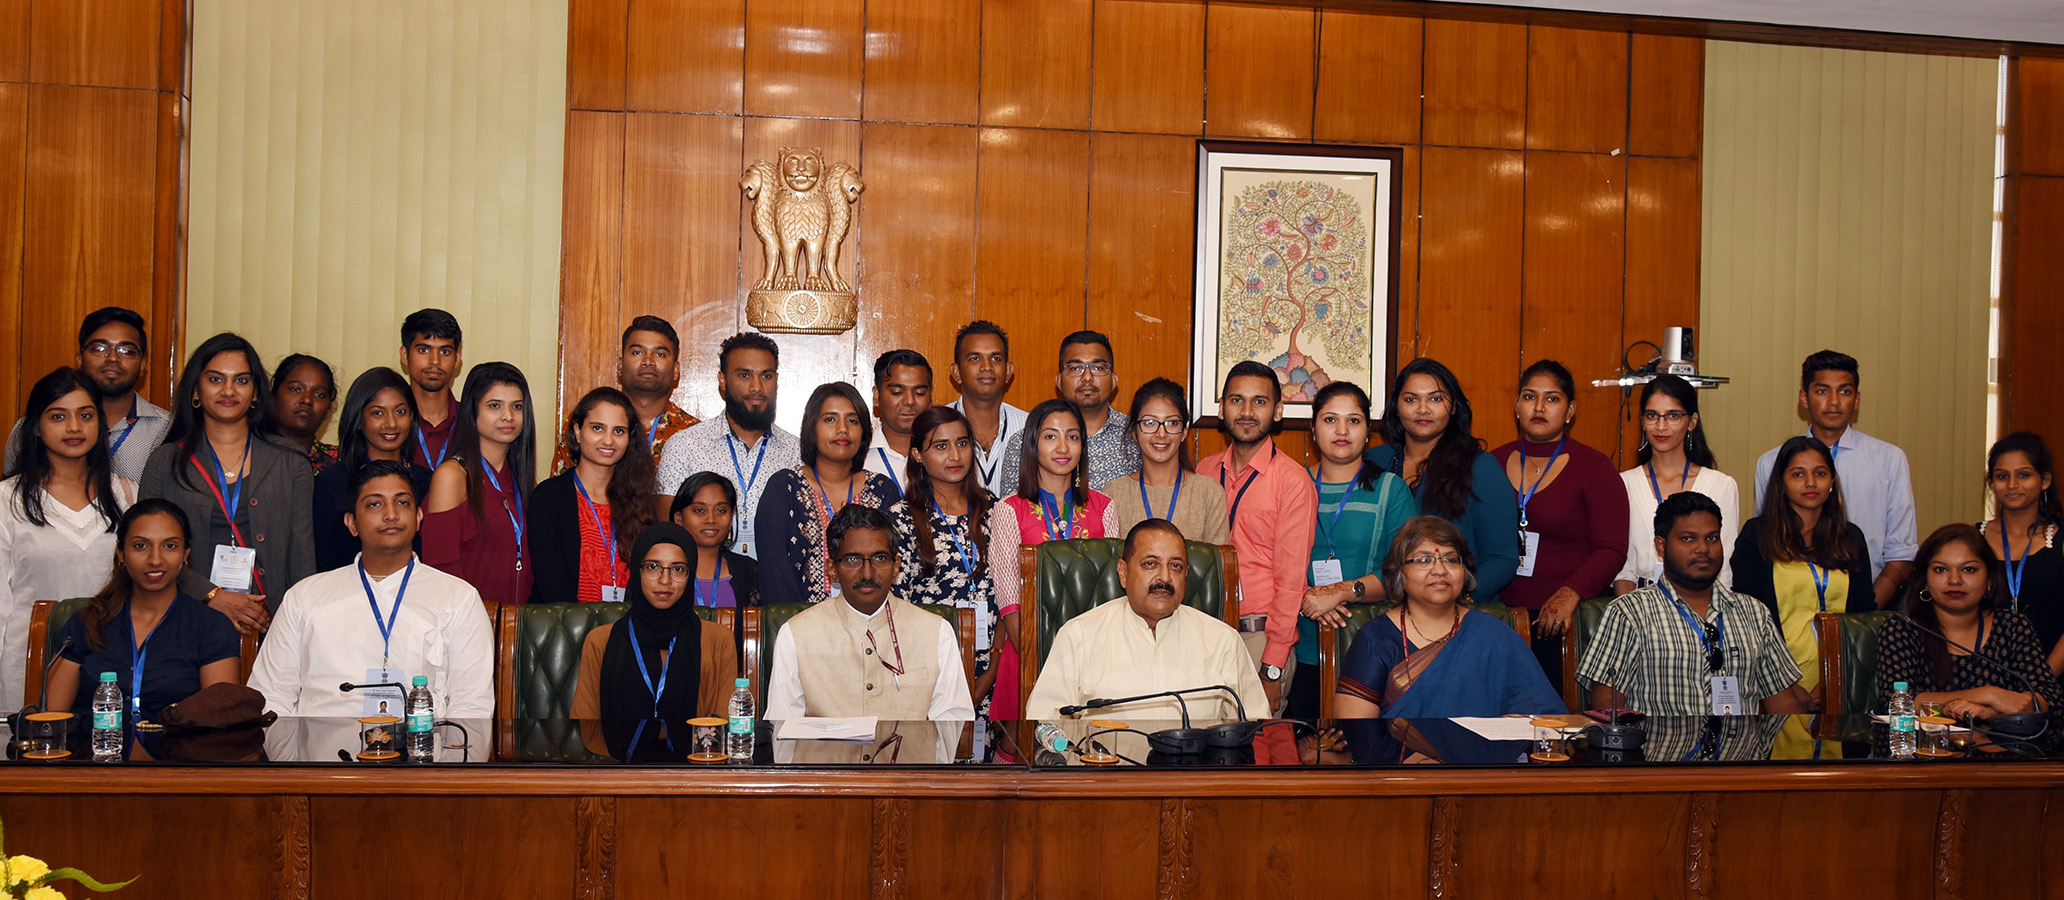 A group of Indian Origin youth visiting India under Know India Programme’ (KIP)